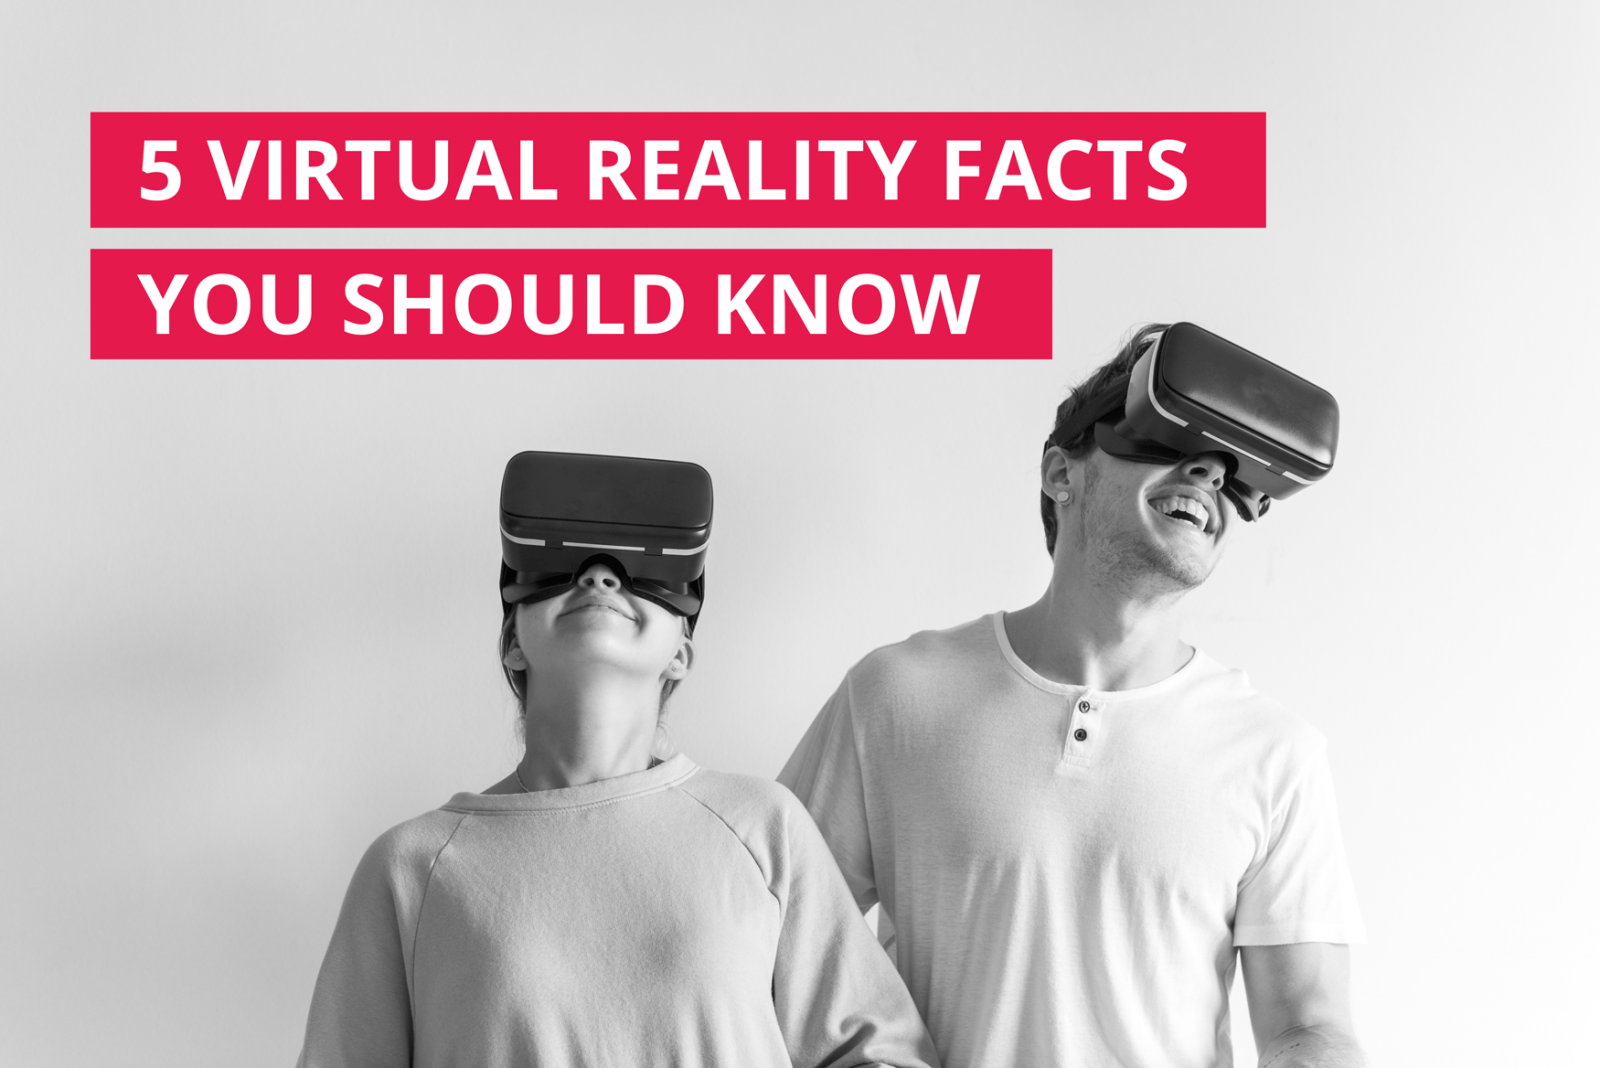 VR Facts 1